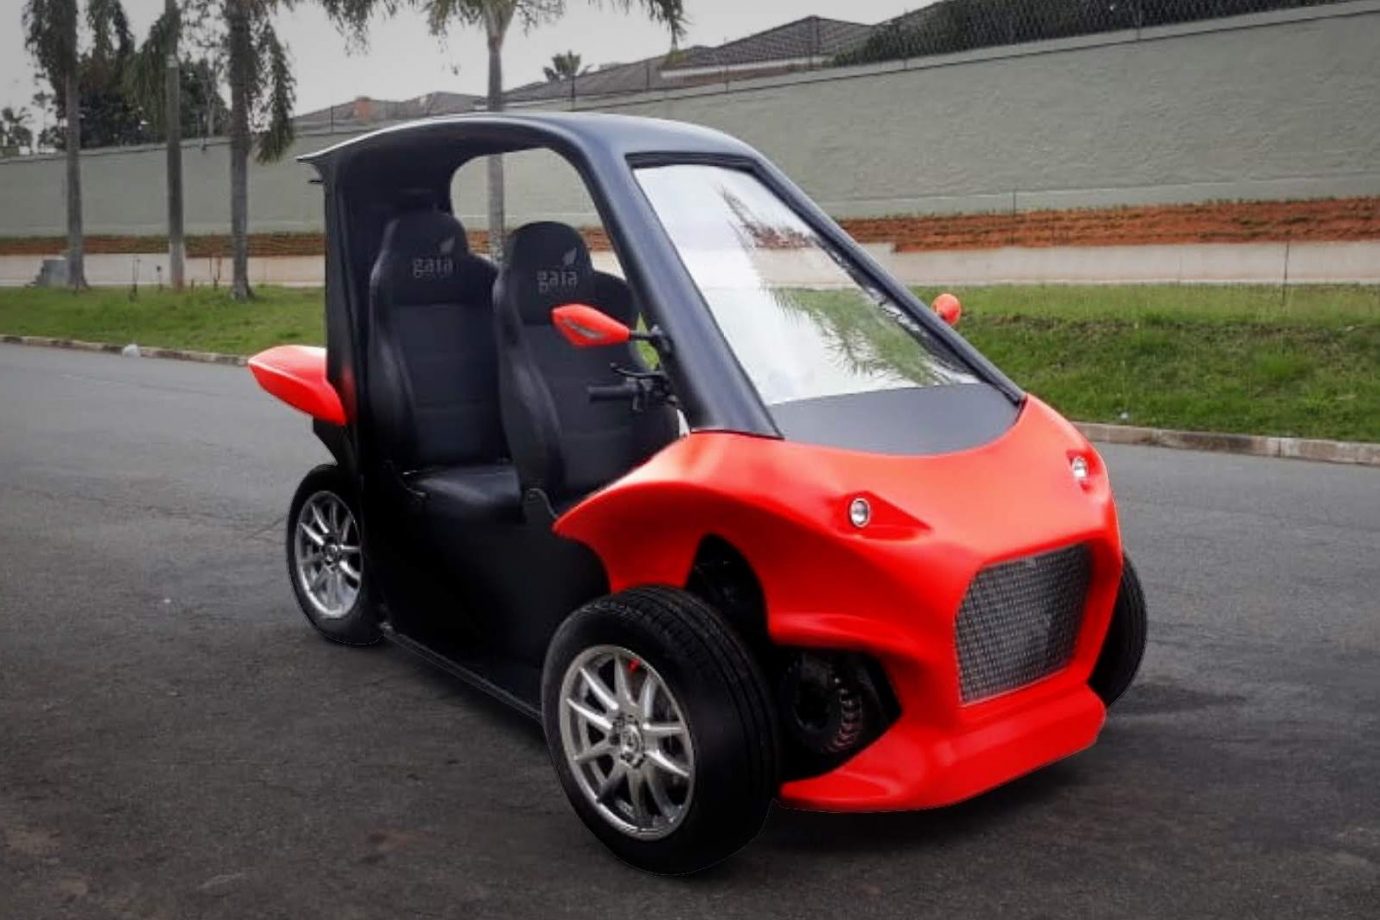 The Gaia tricycle, which should reach the market by the end of the year, is an intermediate between a motorcycle and a minicar.